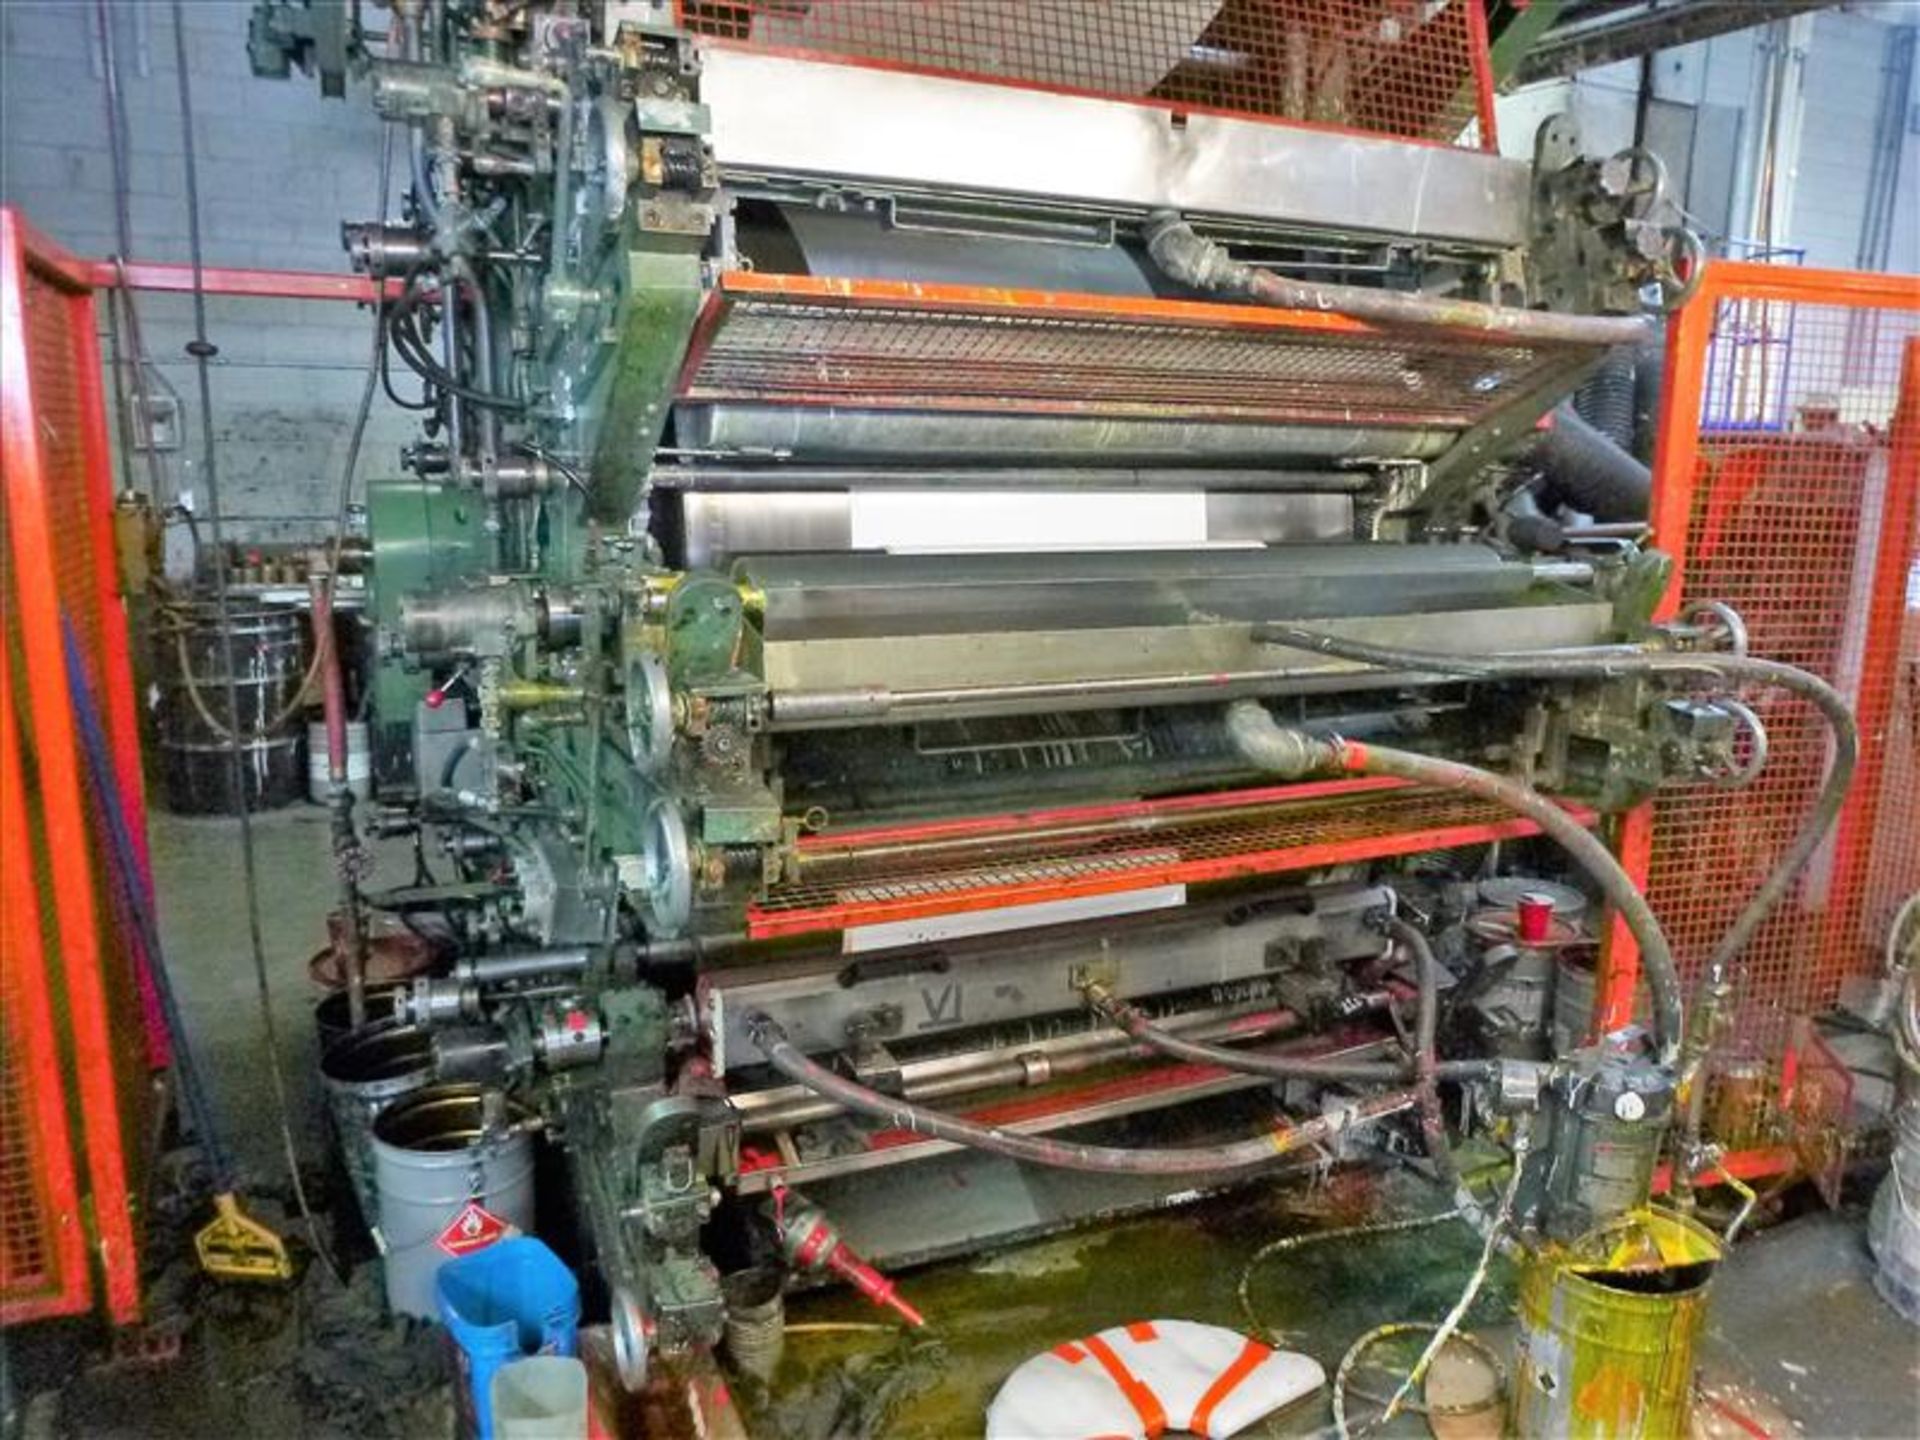 PCMC (Paper Converting Machine Co.) 6-colour central impression flexographic printing press, 56" - Image 5 of 30